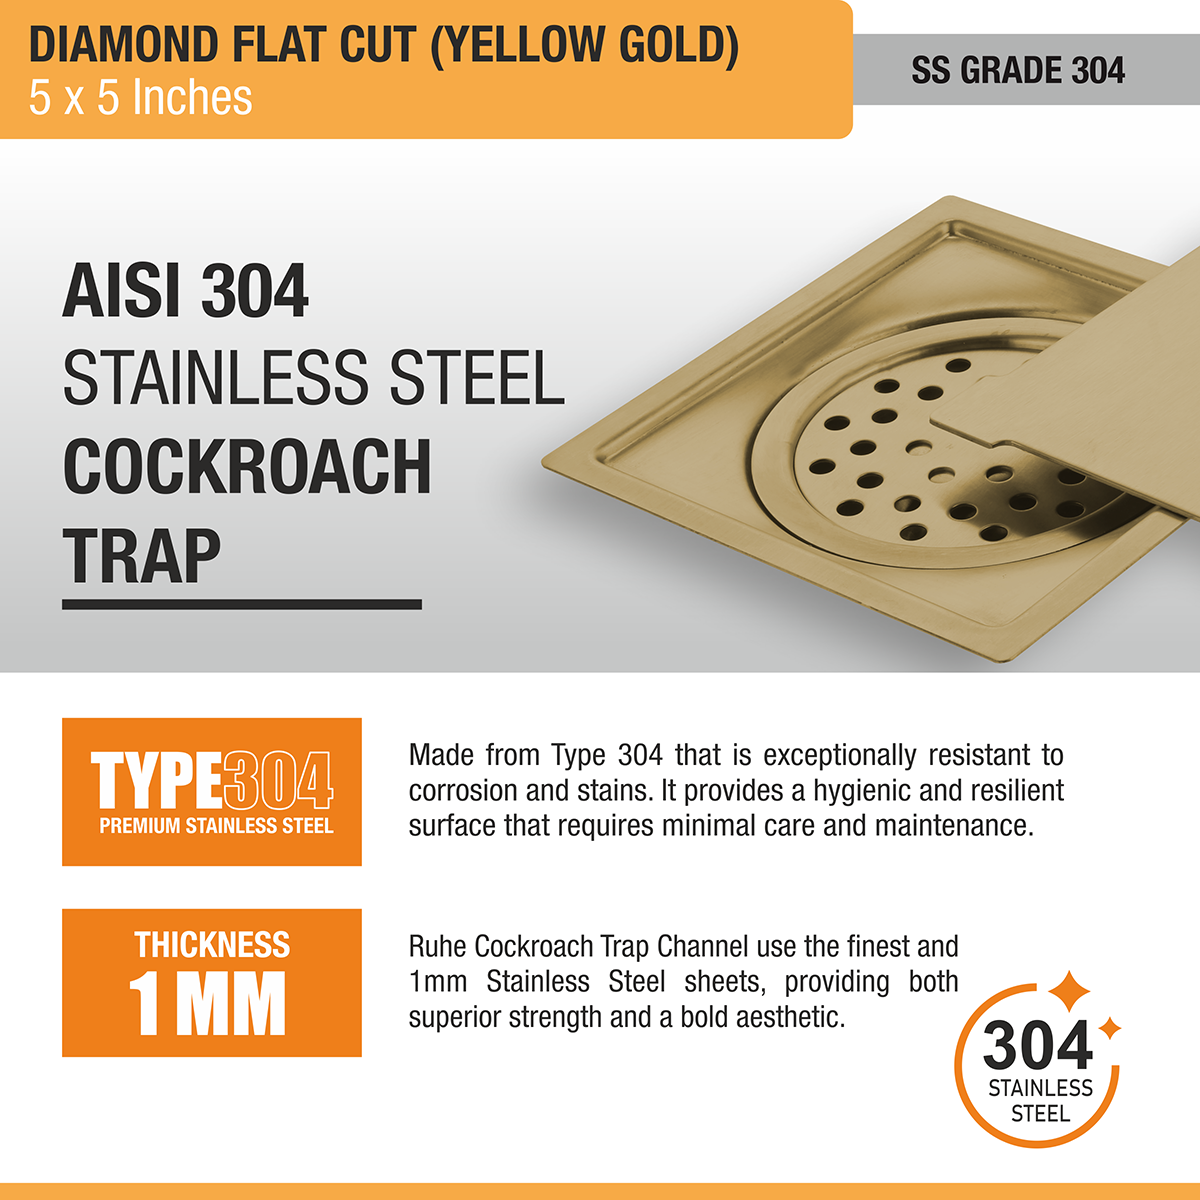 Diamond Square Flat Cut Floor Drain in Yellow Gold PVD Coating (5 x 5 Inches) stainless steel